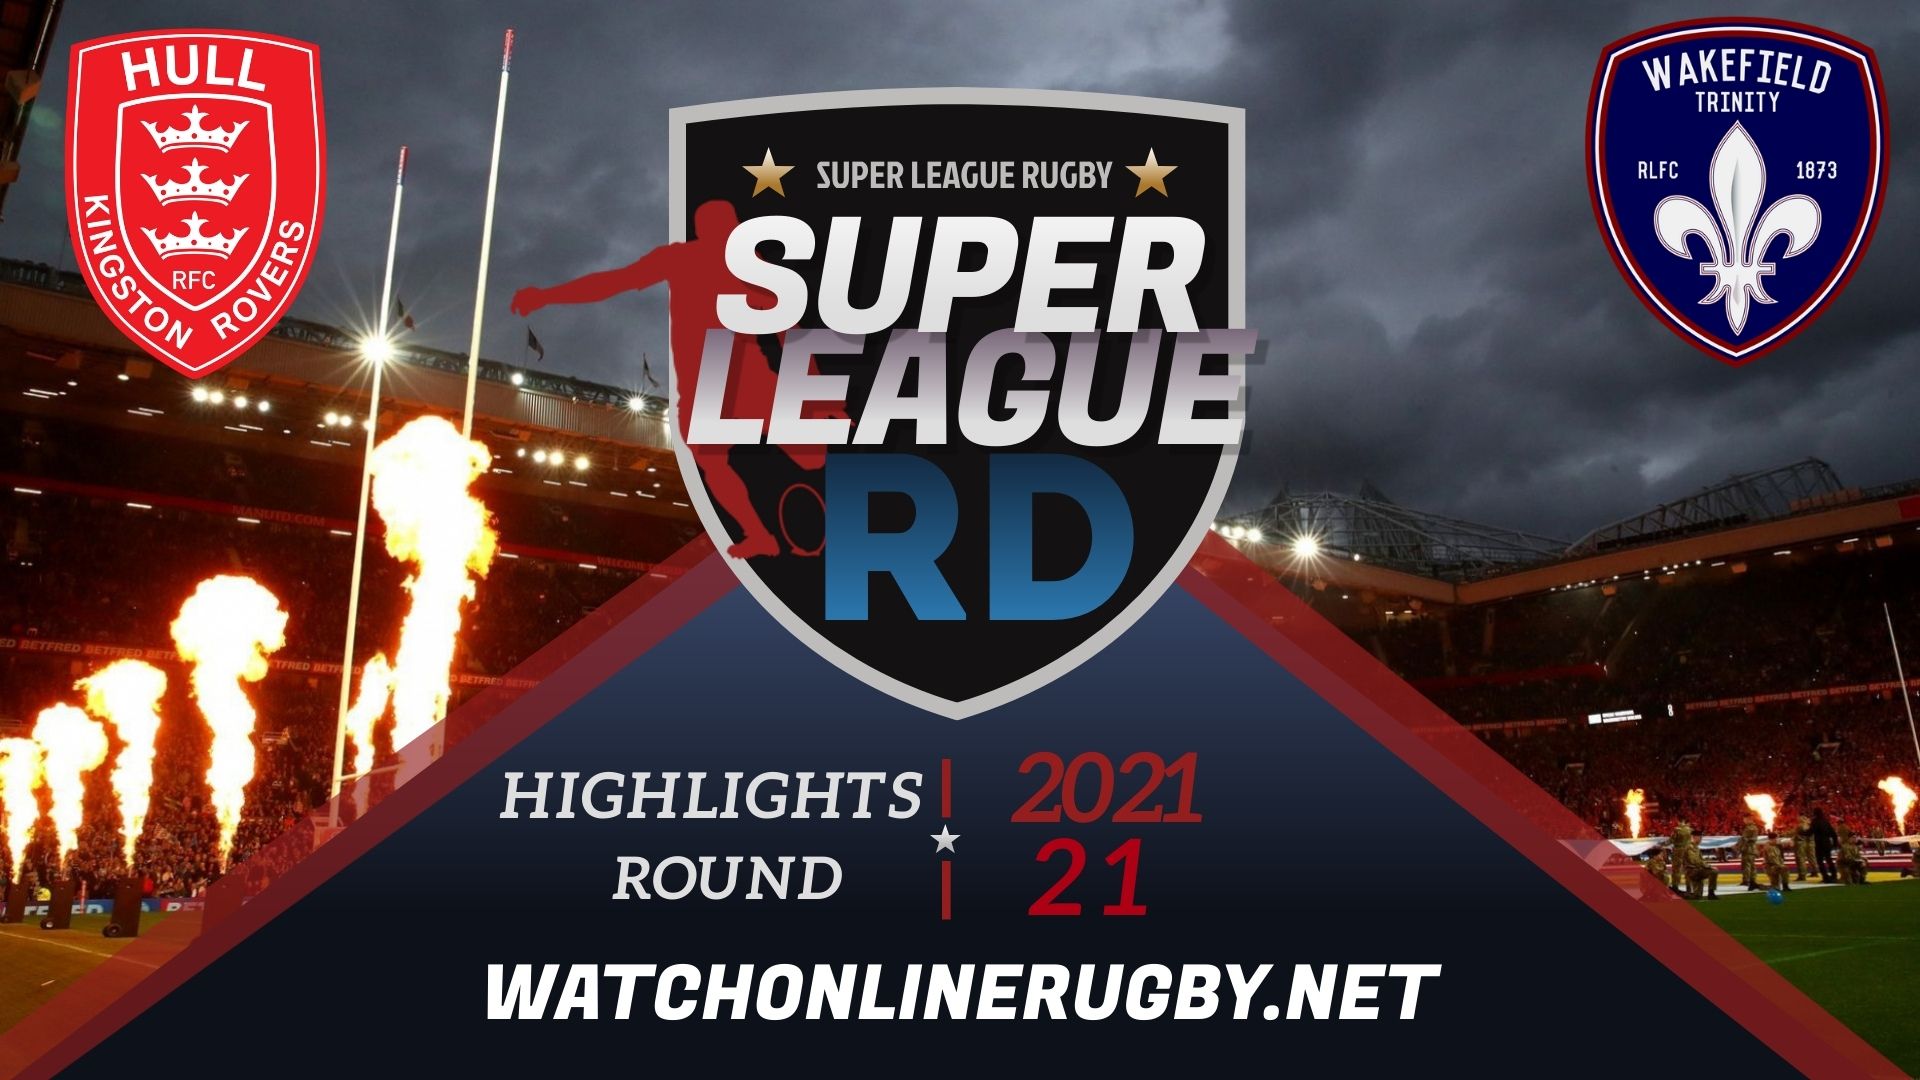 Hull KR Vs Wakefield Trinity Super League Rugby 2021 RD 21